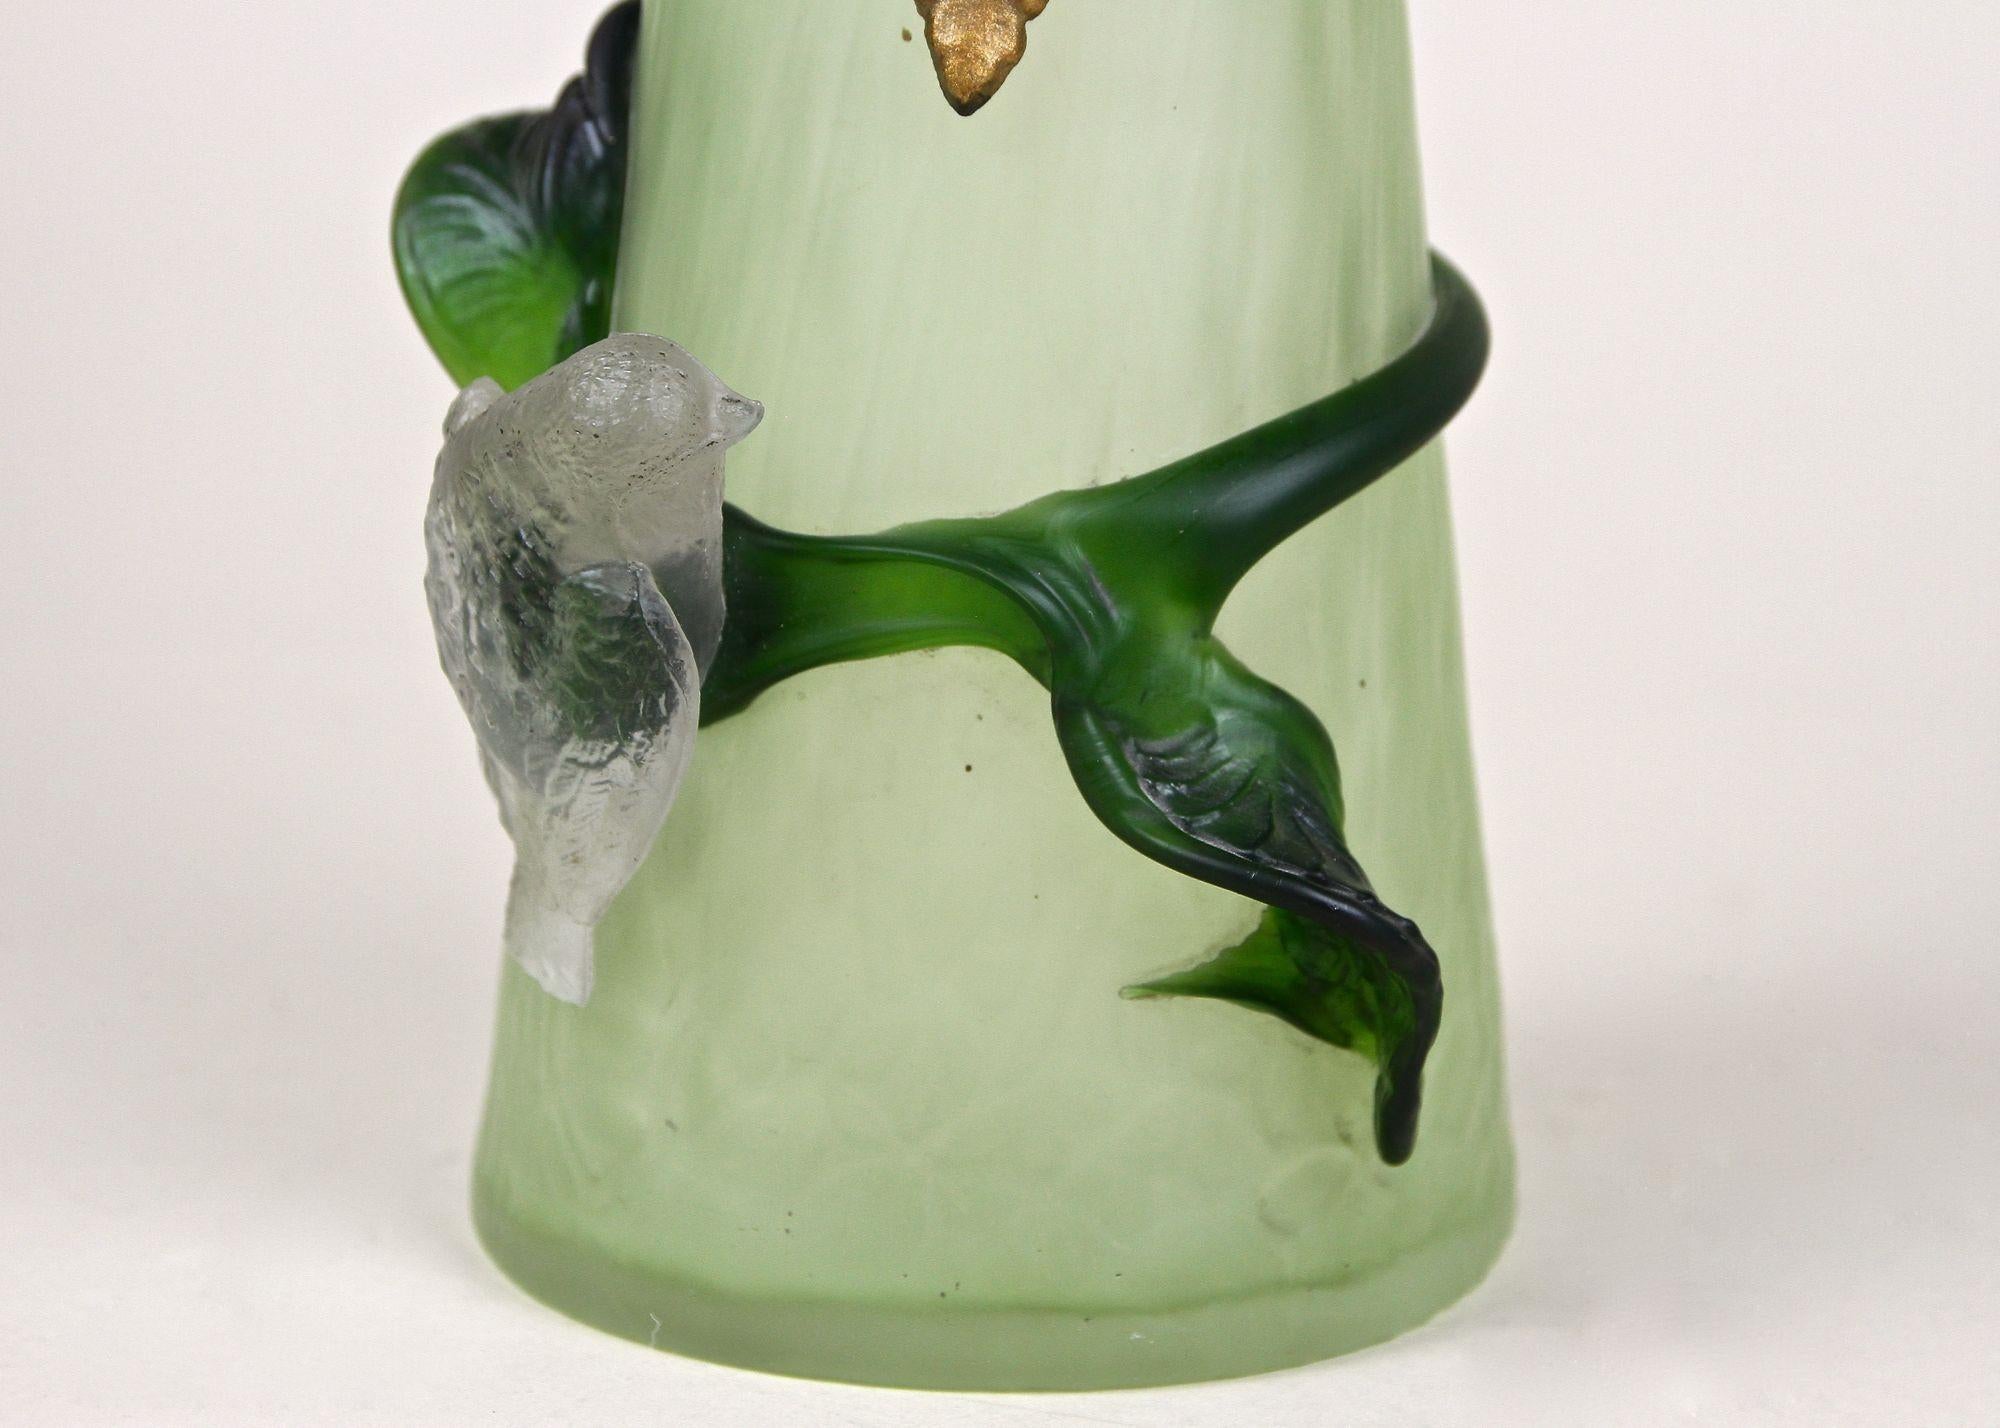 Gorgeous, unusual Art Nouveau Glass Vase from the well known Bohemian glass manufactory of Rindskopf & Söhne in Teplitz around 1905. The beautiful green shining glass vase impresses with its fantastic shaped body which is additionally adorned by a